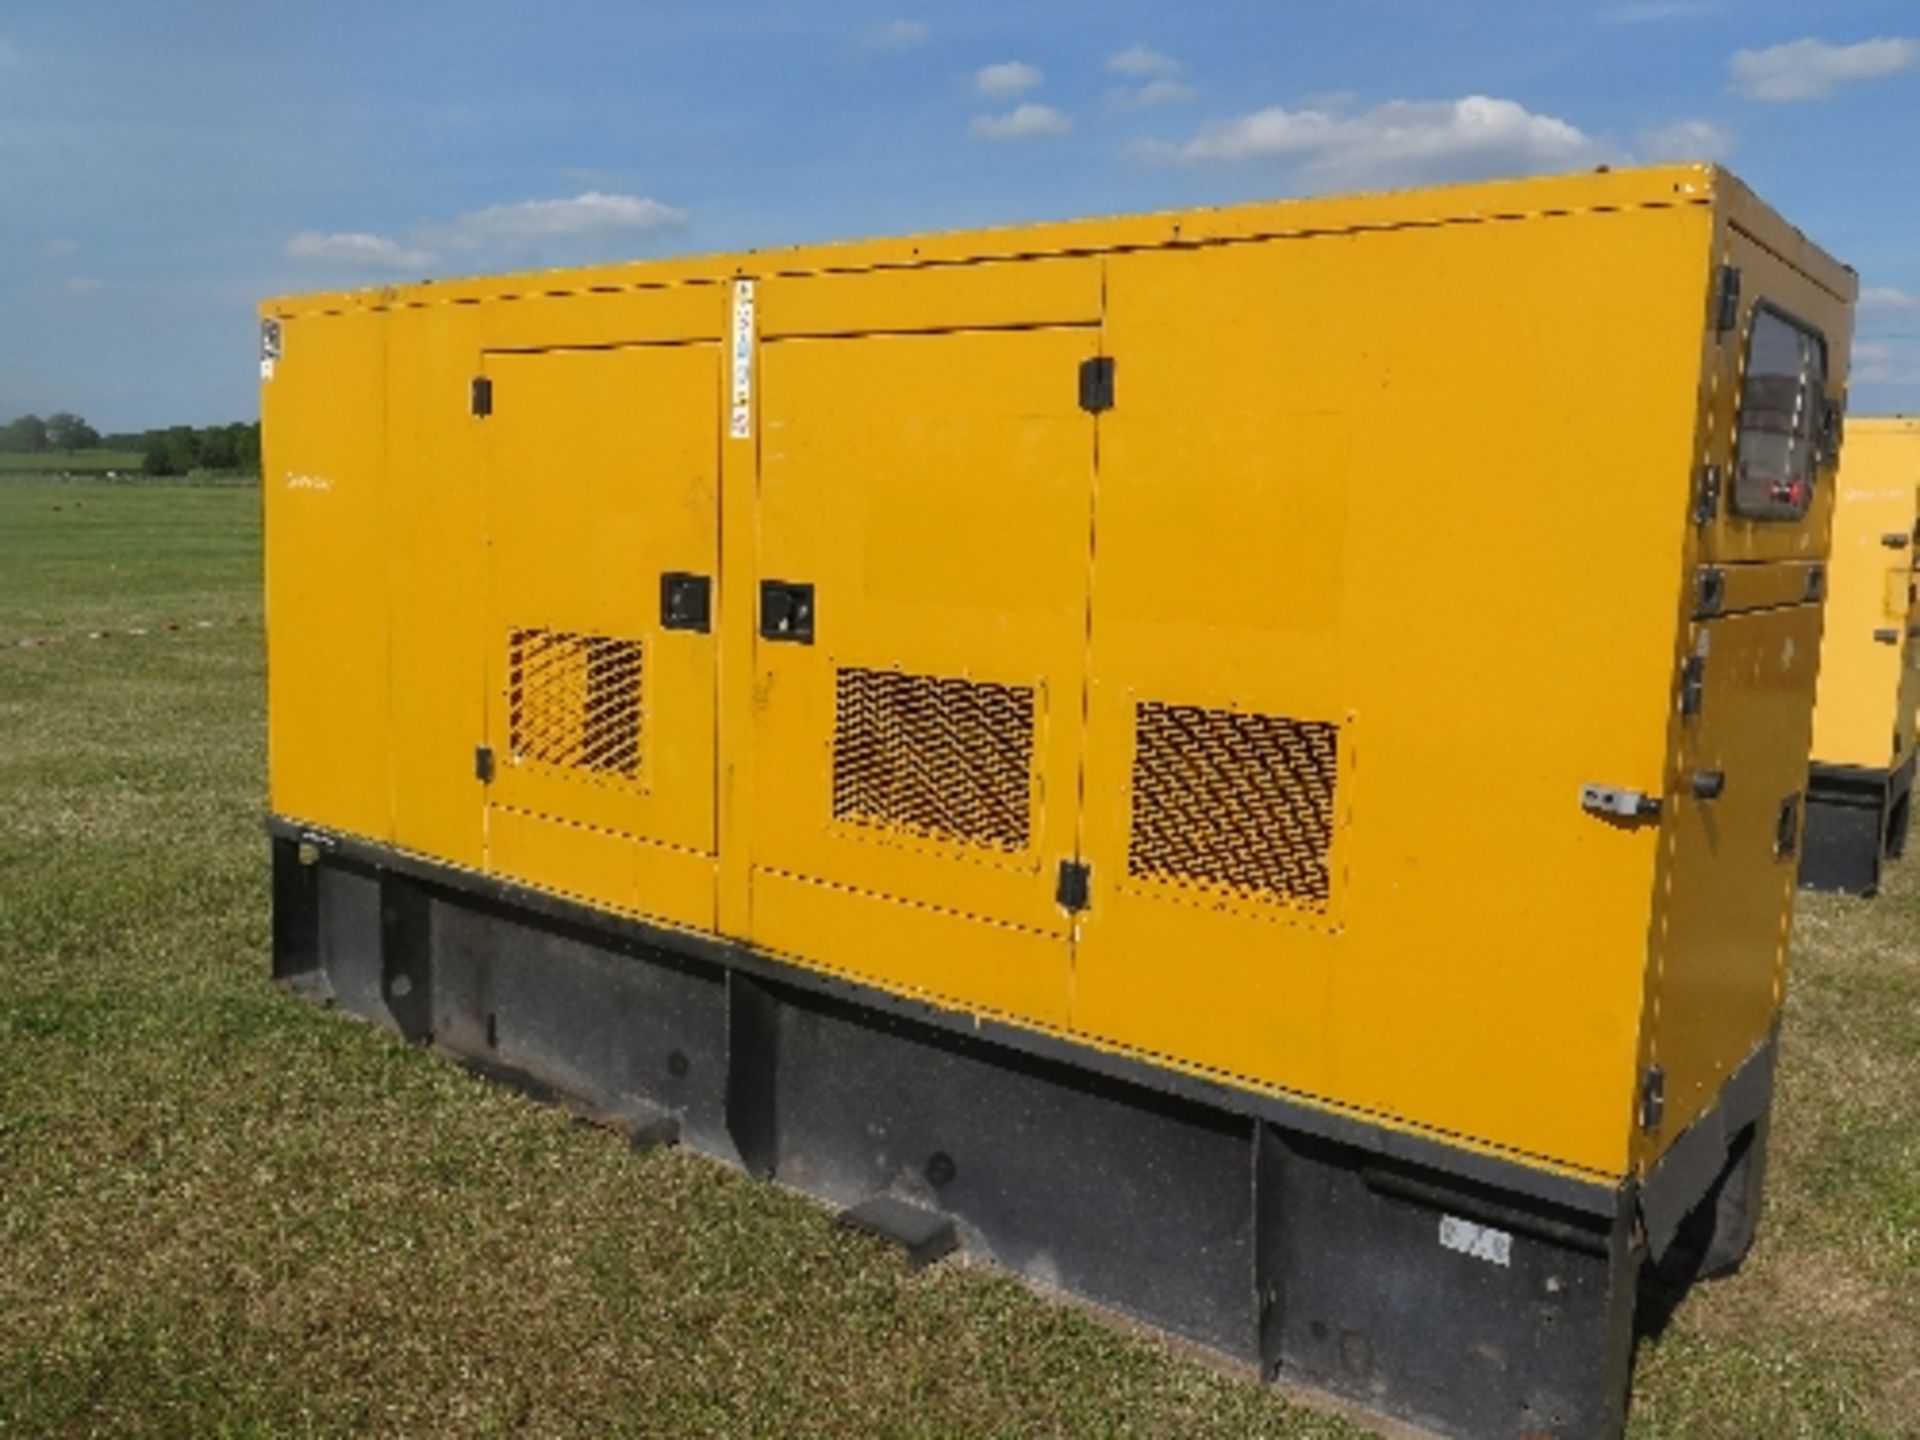 Caterpillar XQE100 generator 16850 hrs 138842
PERKINS POWER - RUNS AND MAKES POWER
ALL LOTS are